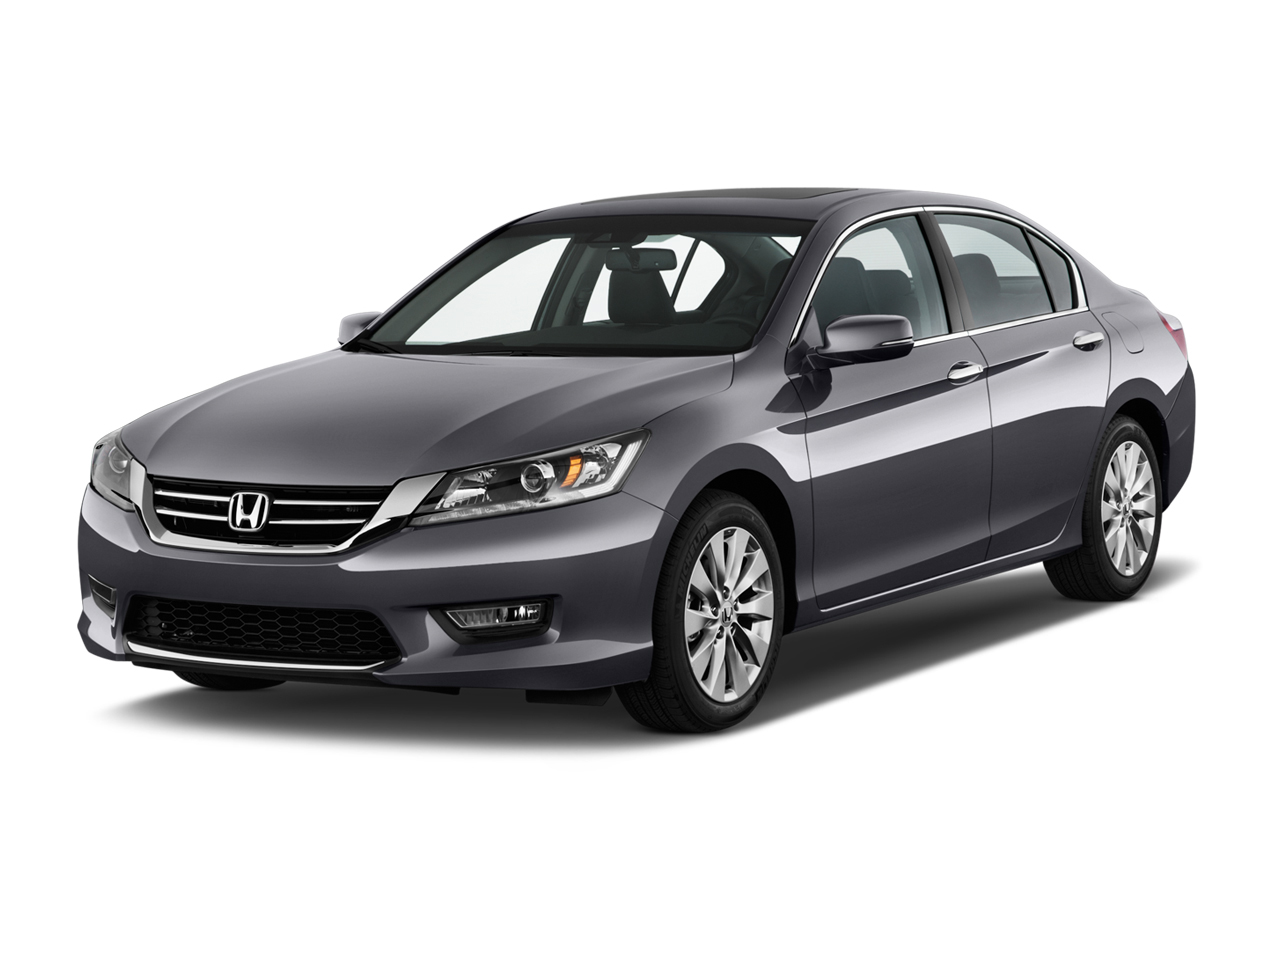 2013-Honda-Accord-LX Have Used Car Prices Finally Plateaued?